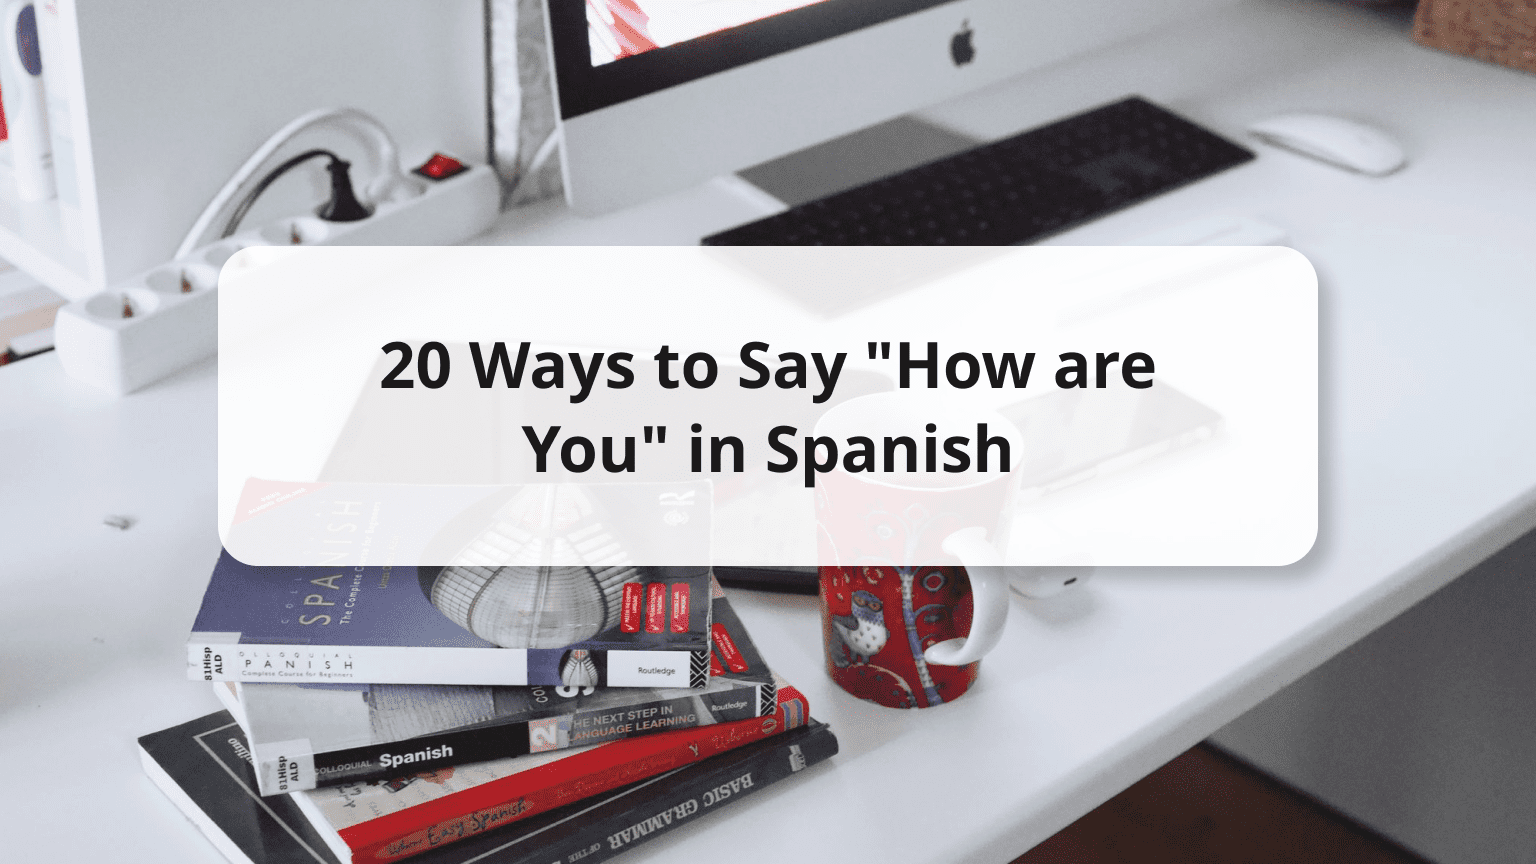 how to say how's it going in spanish